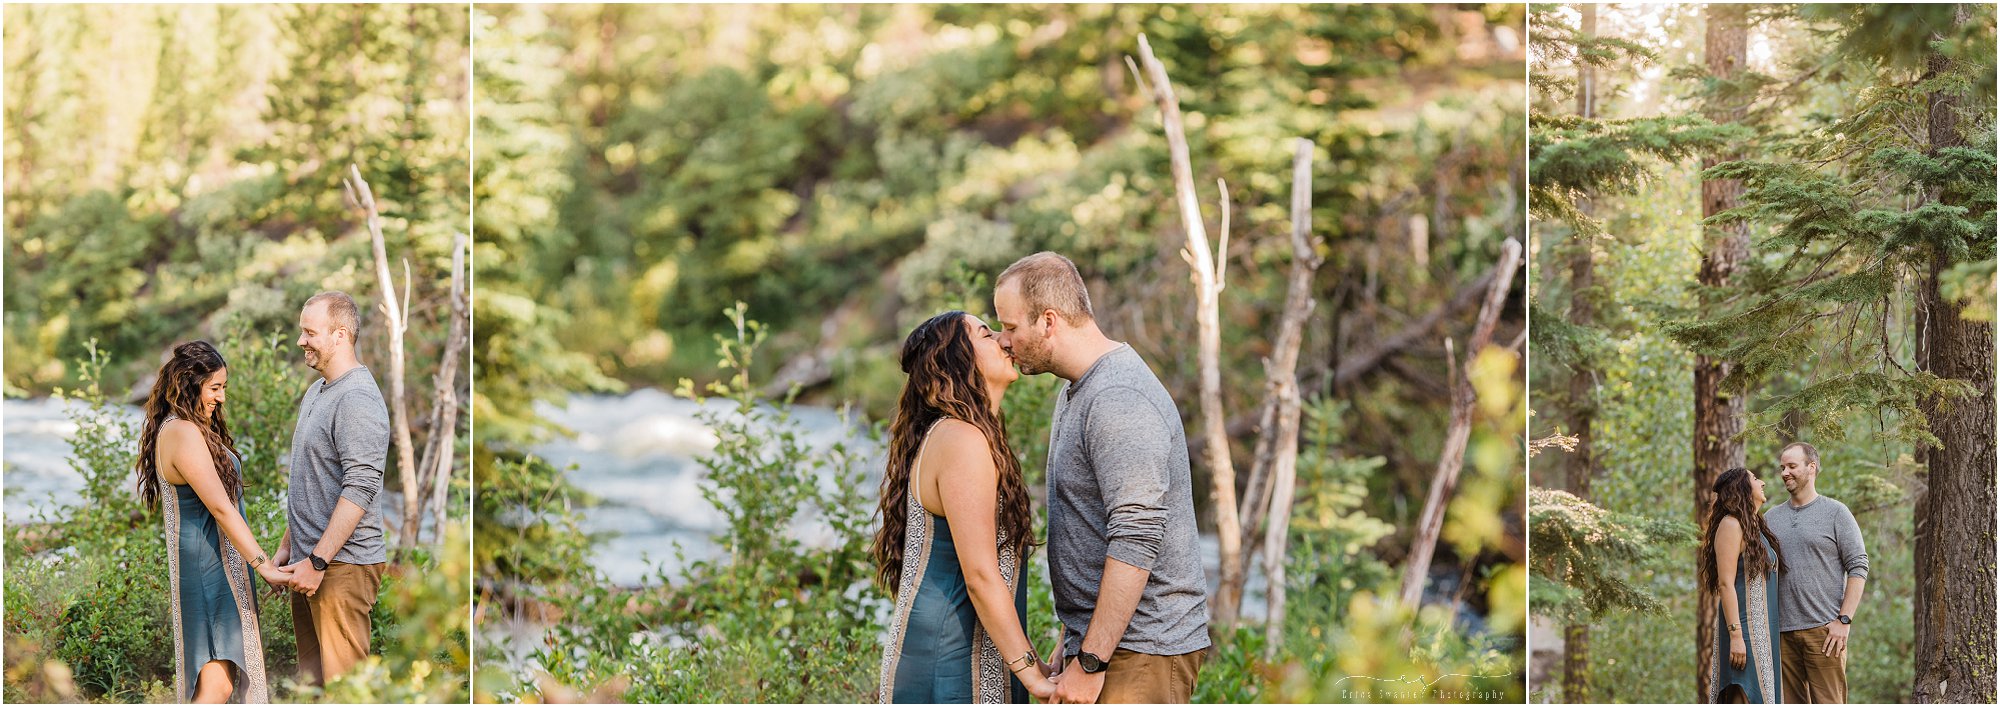 Gorgeous light filtering through tall pine trees during a Tumalo Falls engagement photos session in Bend, OR. | Erica Swantek Photography